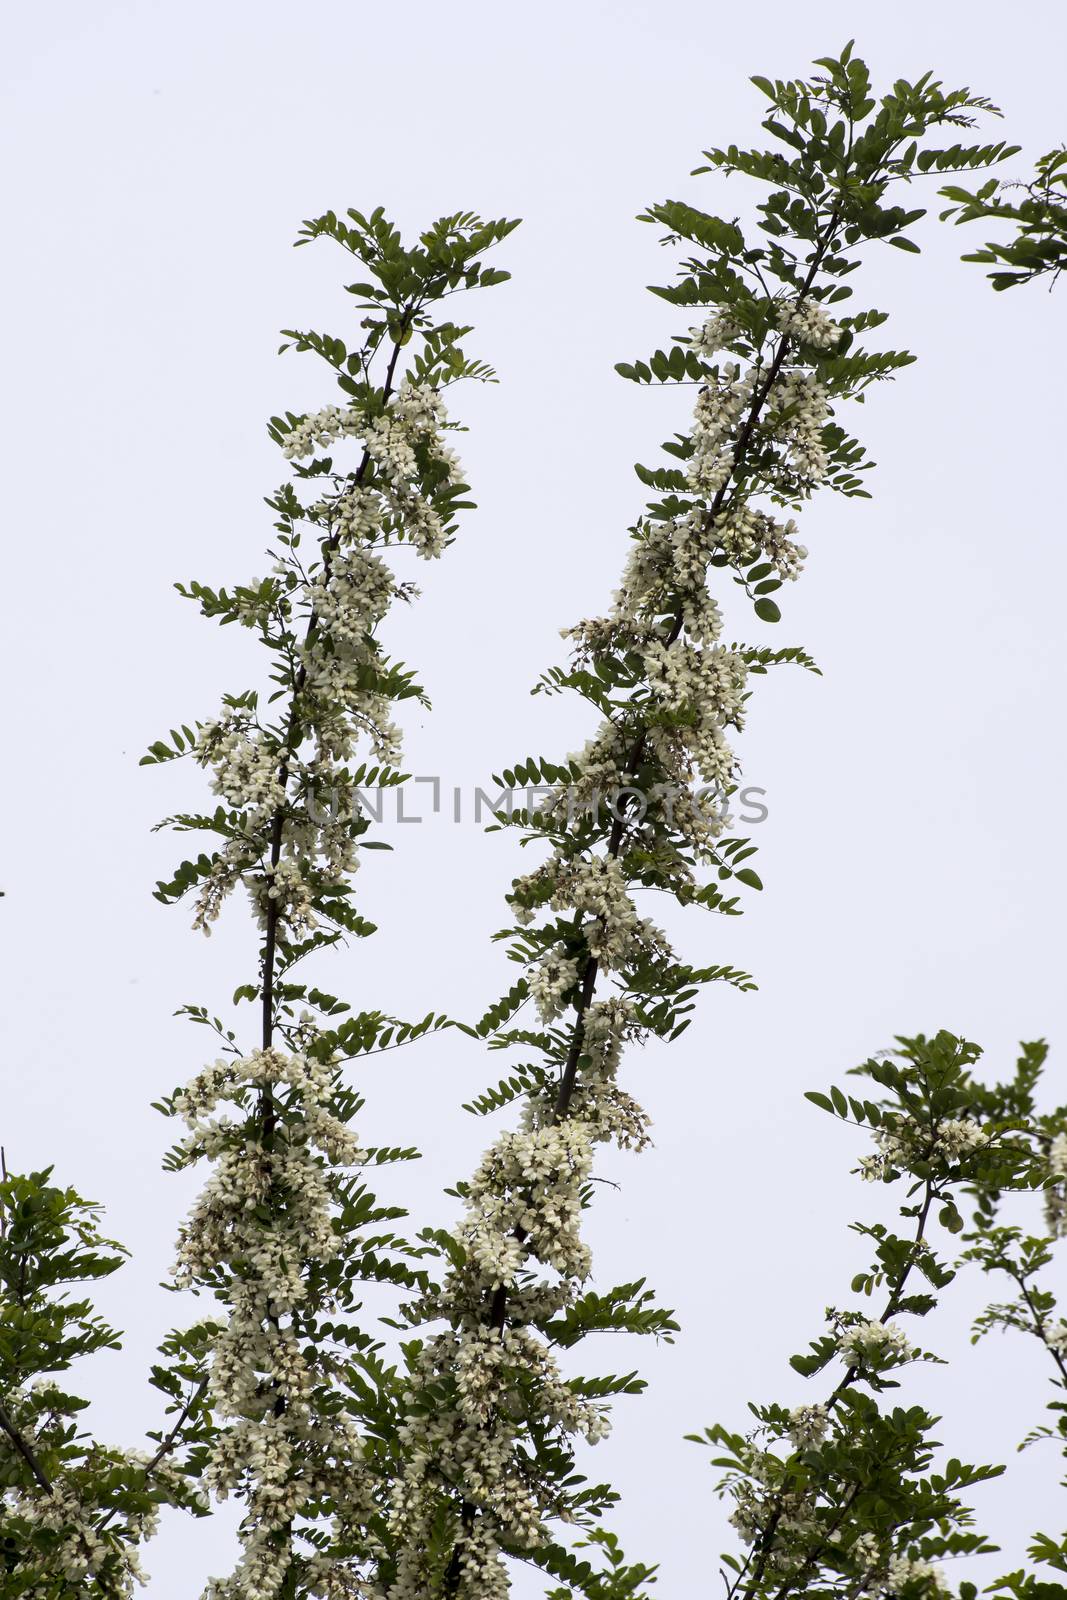 The strong aroma of white acacia flowers.